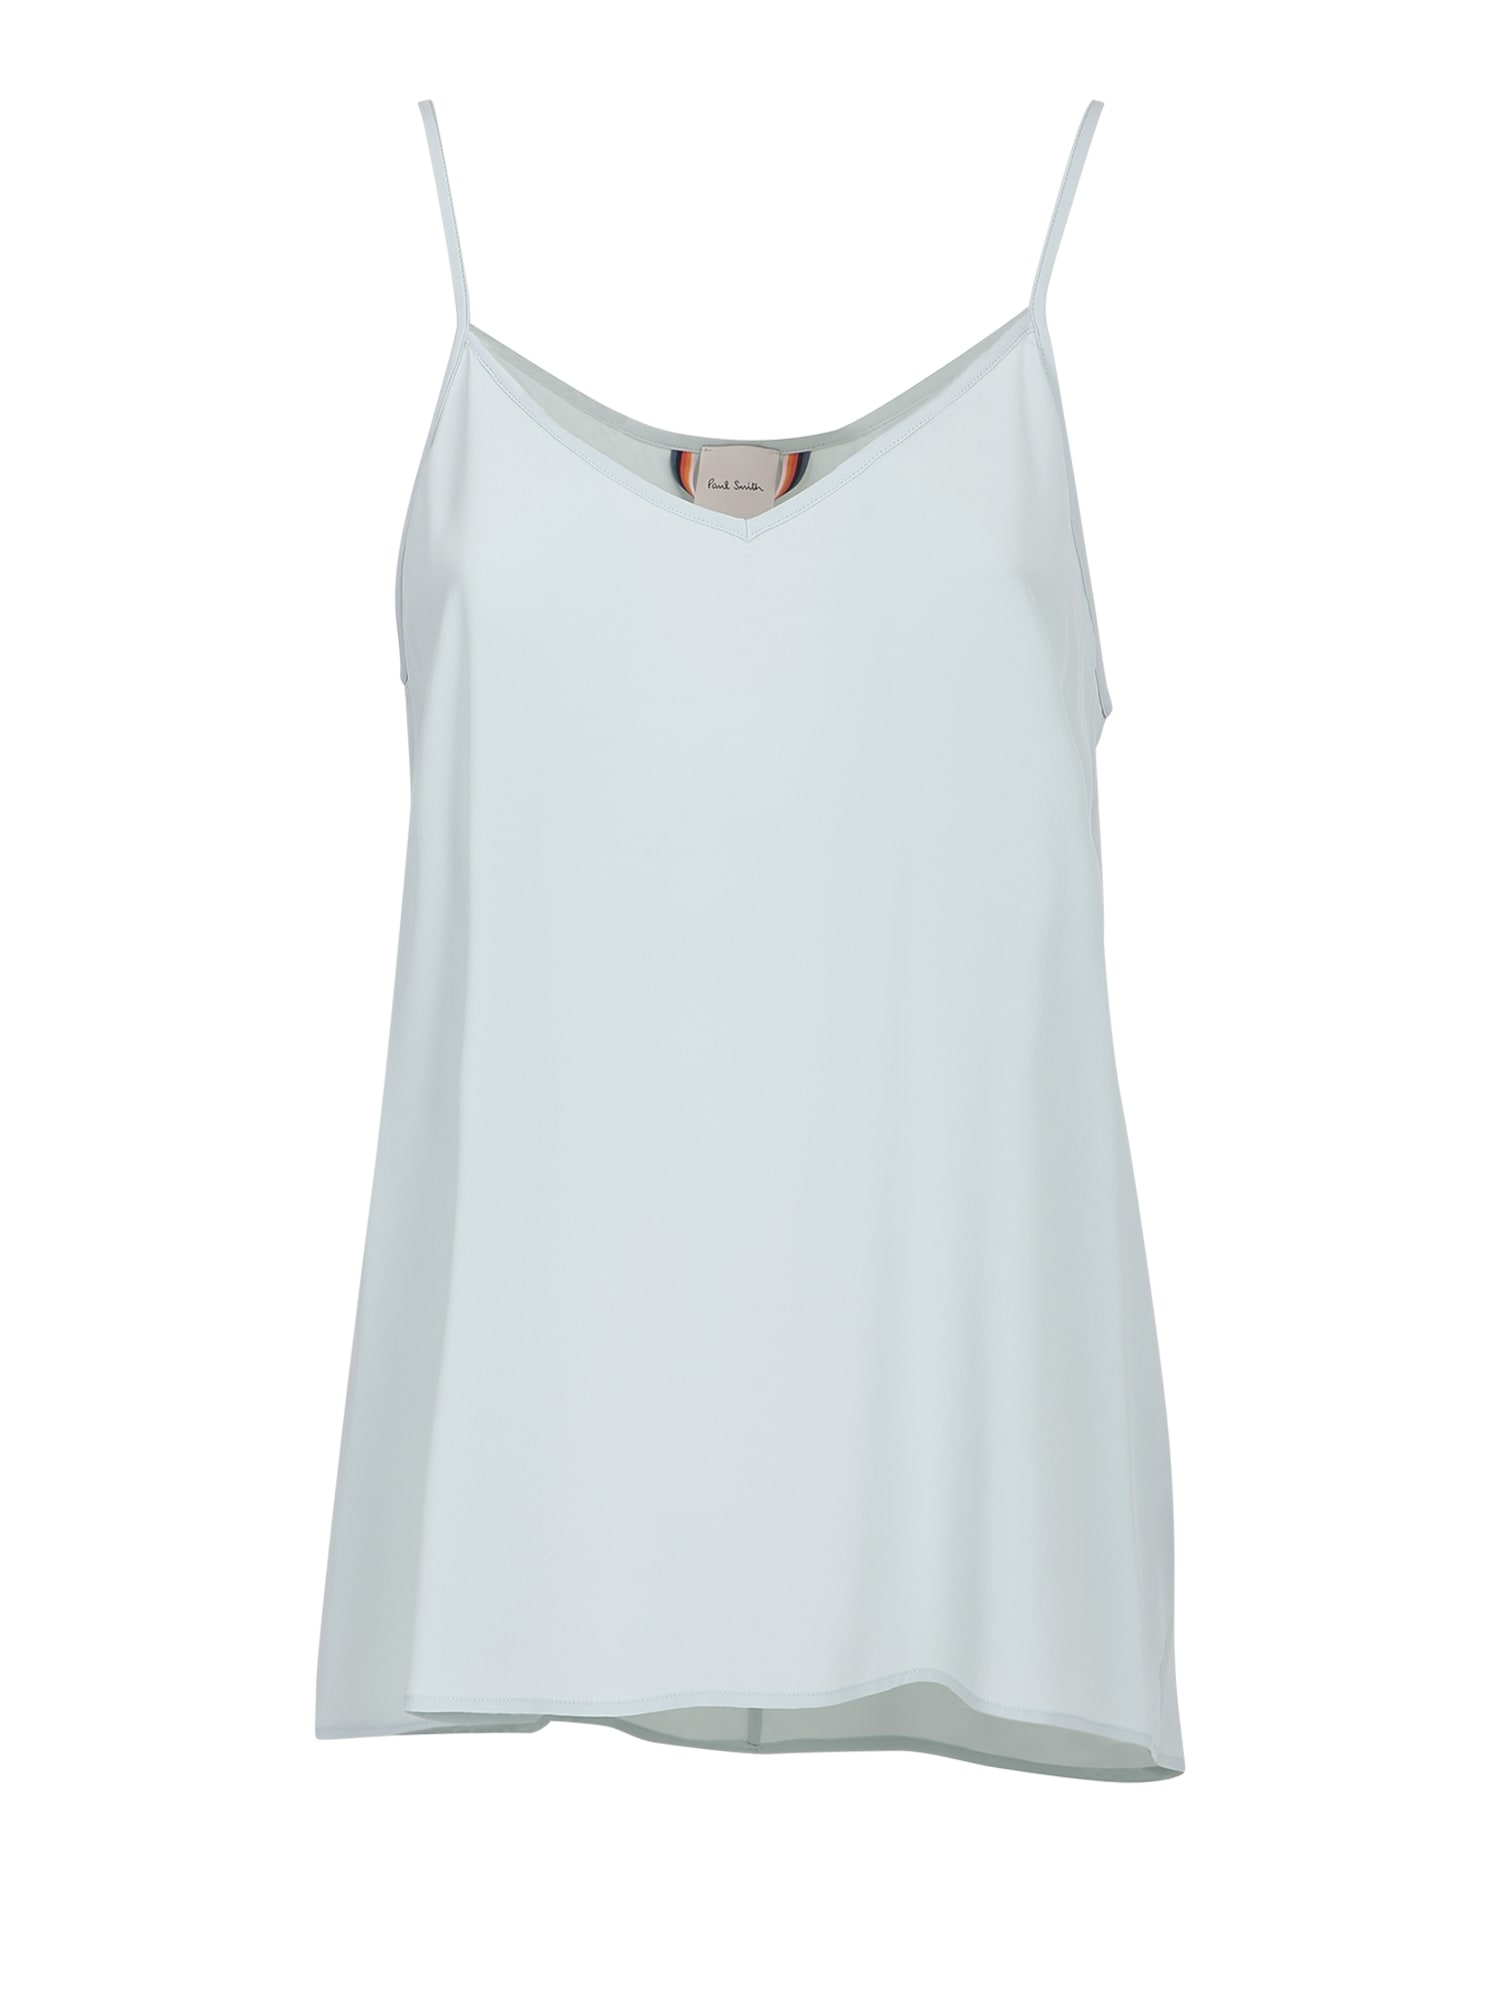 PAUL SMITH RELAXED FIT TOP,W1R-071M E10046 41